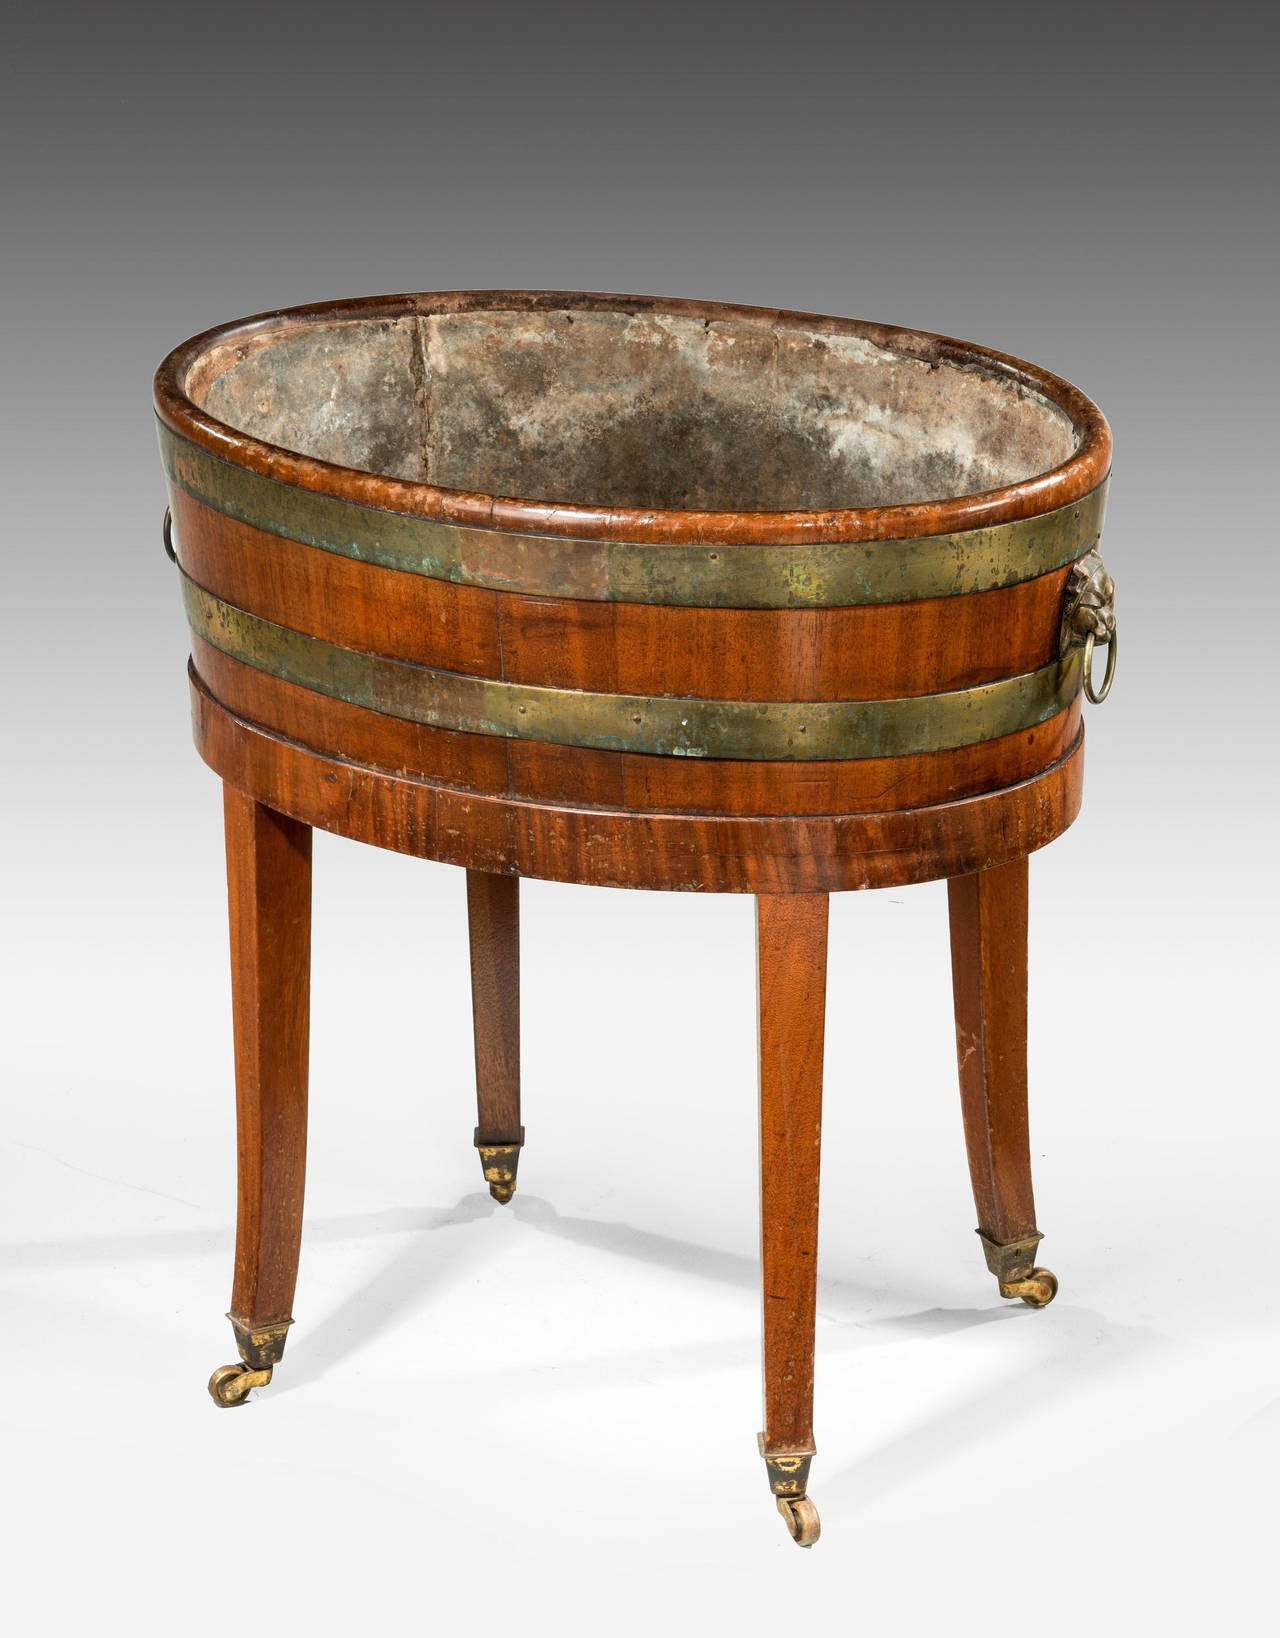 A Late 19th Century oval mahogany planter or champagne cooler. Bound with brass, of coopered construction on very slightly flared, tapering supports ending in the original shoes and casters.